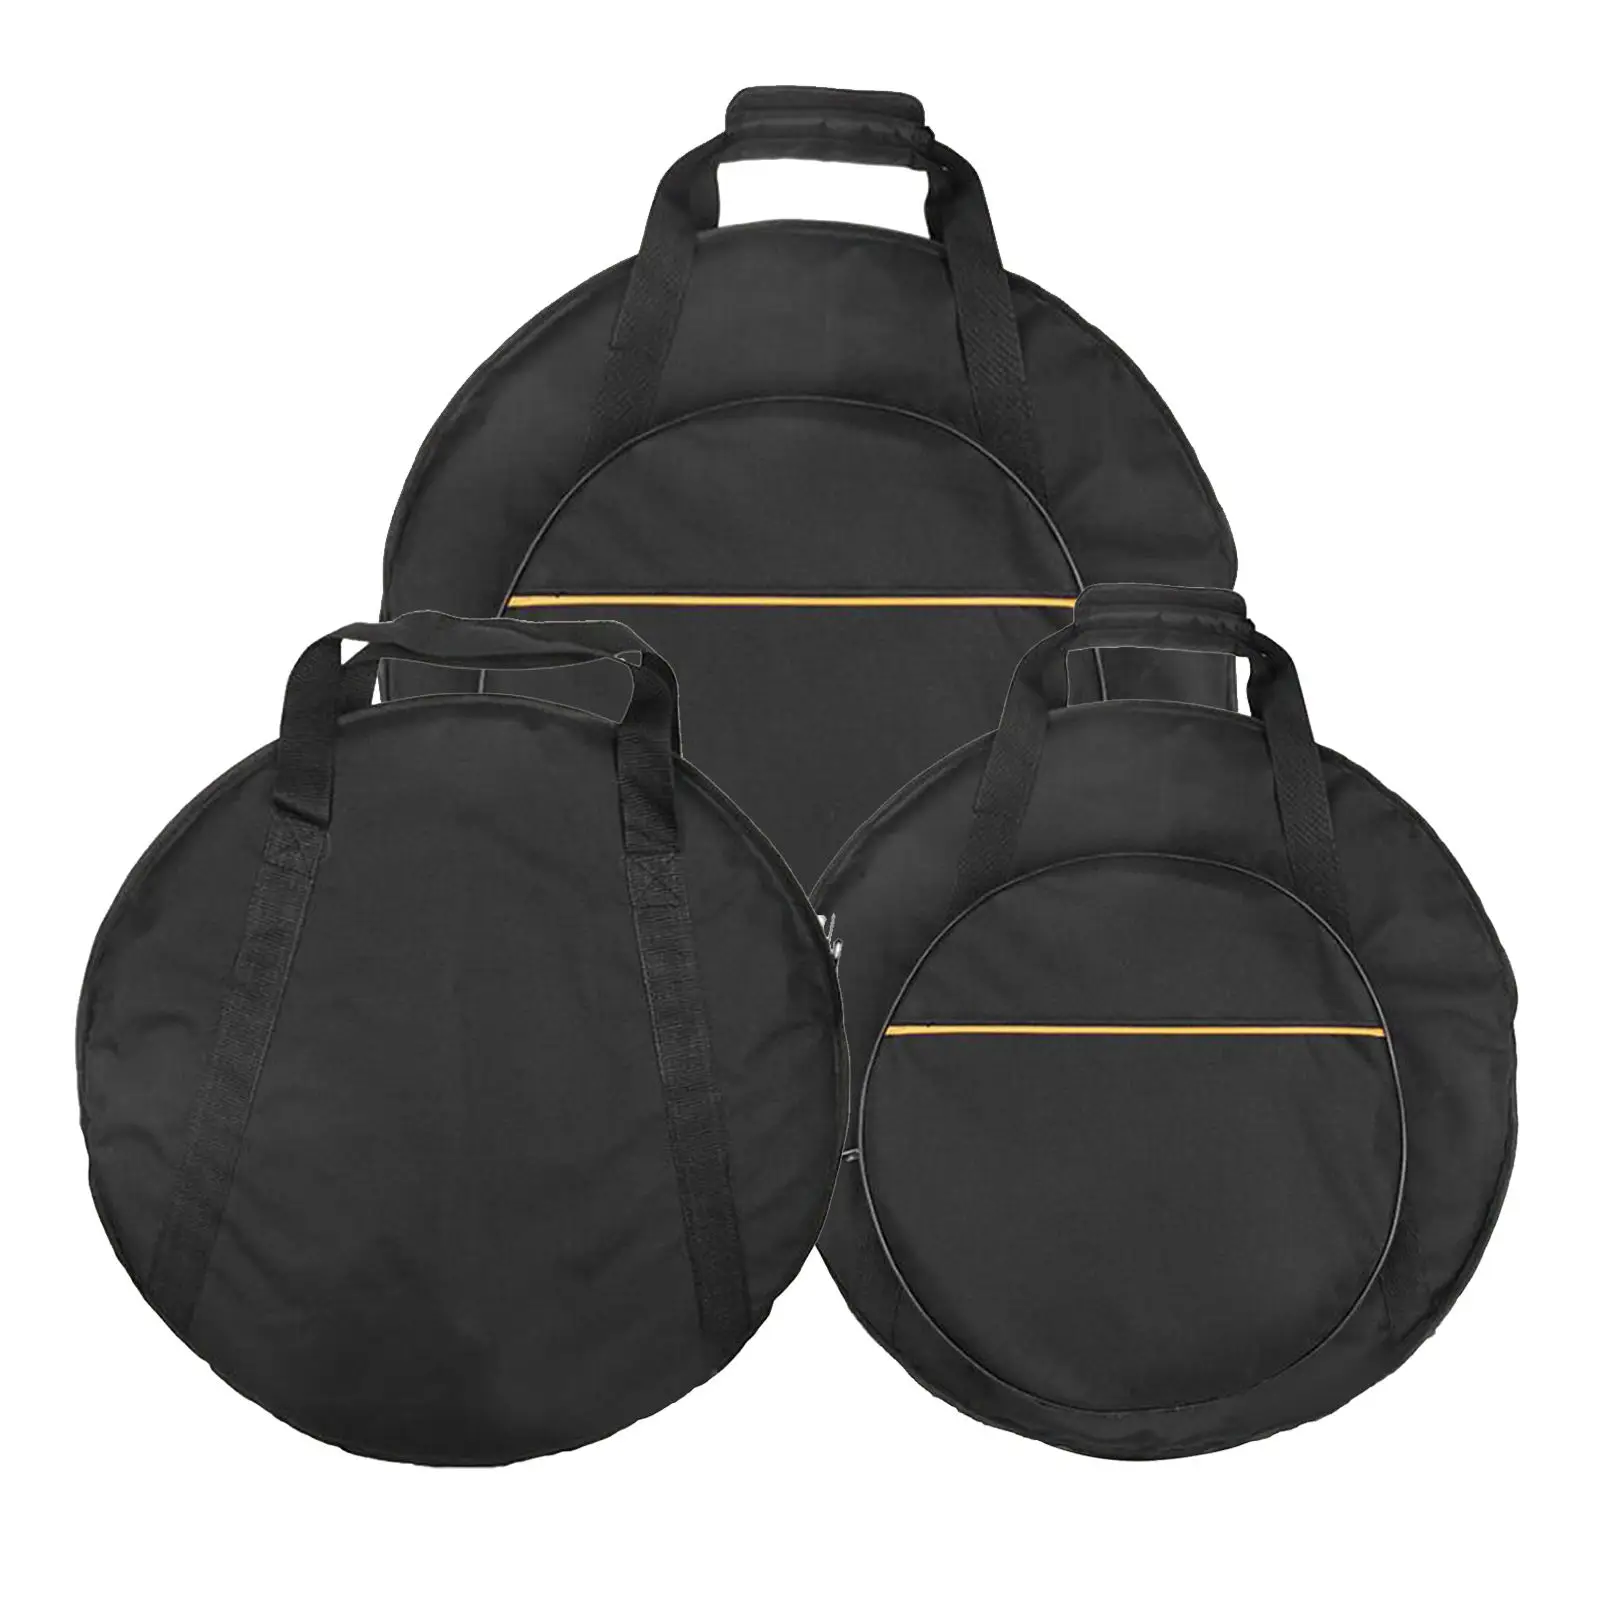 1x Multi-Function Cymbal Bag Anti-Fall with Carry Handles Heavy Duty Instrument Supply Musical Instrument Storage Bag